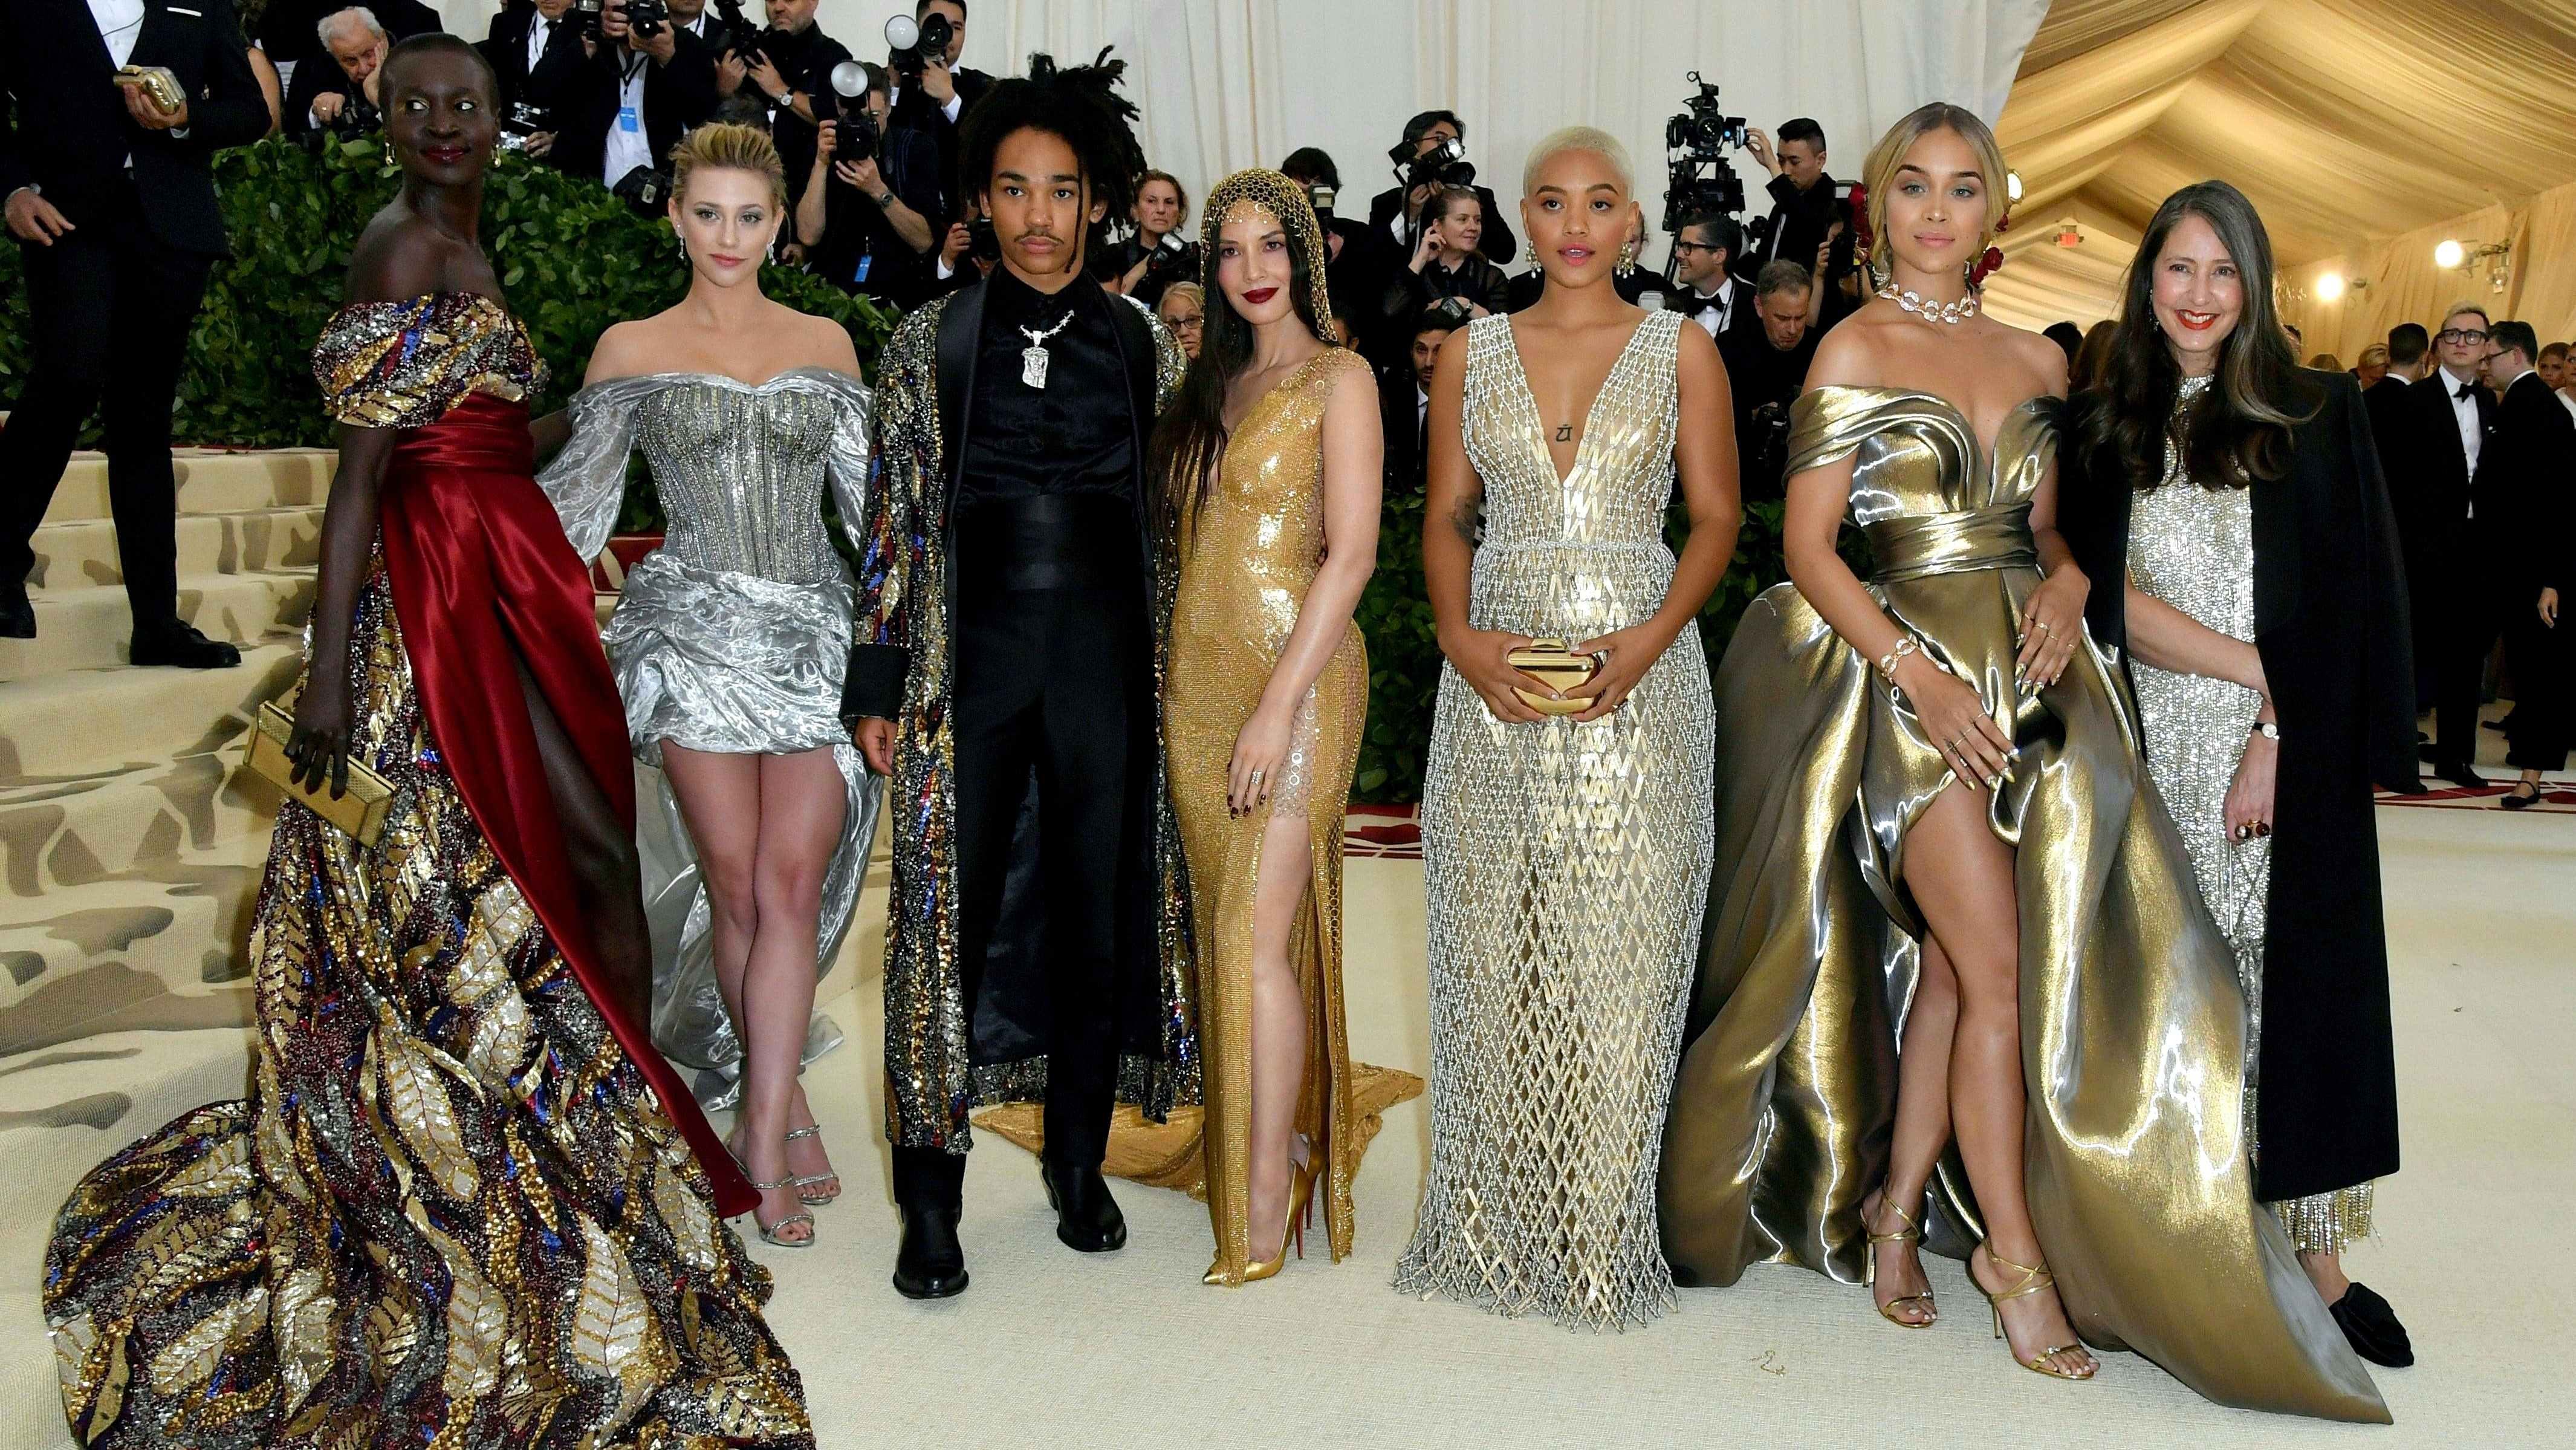 The Met Gala's high fashion labels has a problem: exclusivity